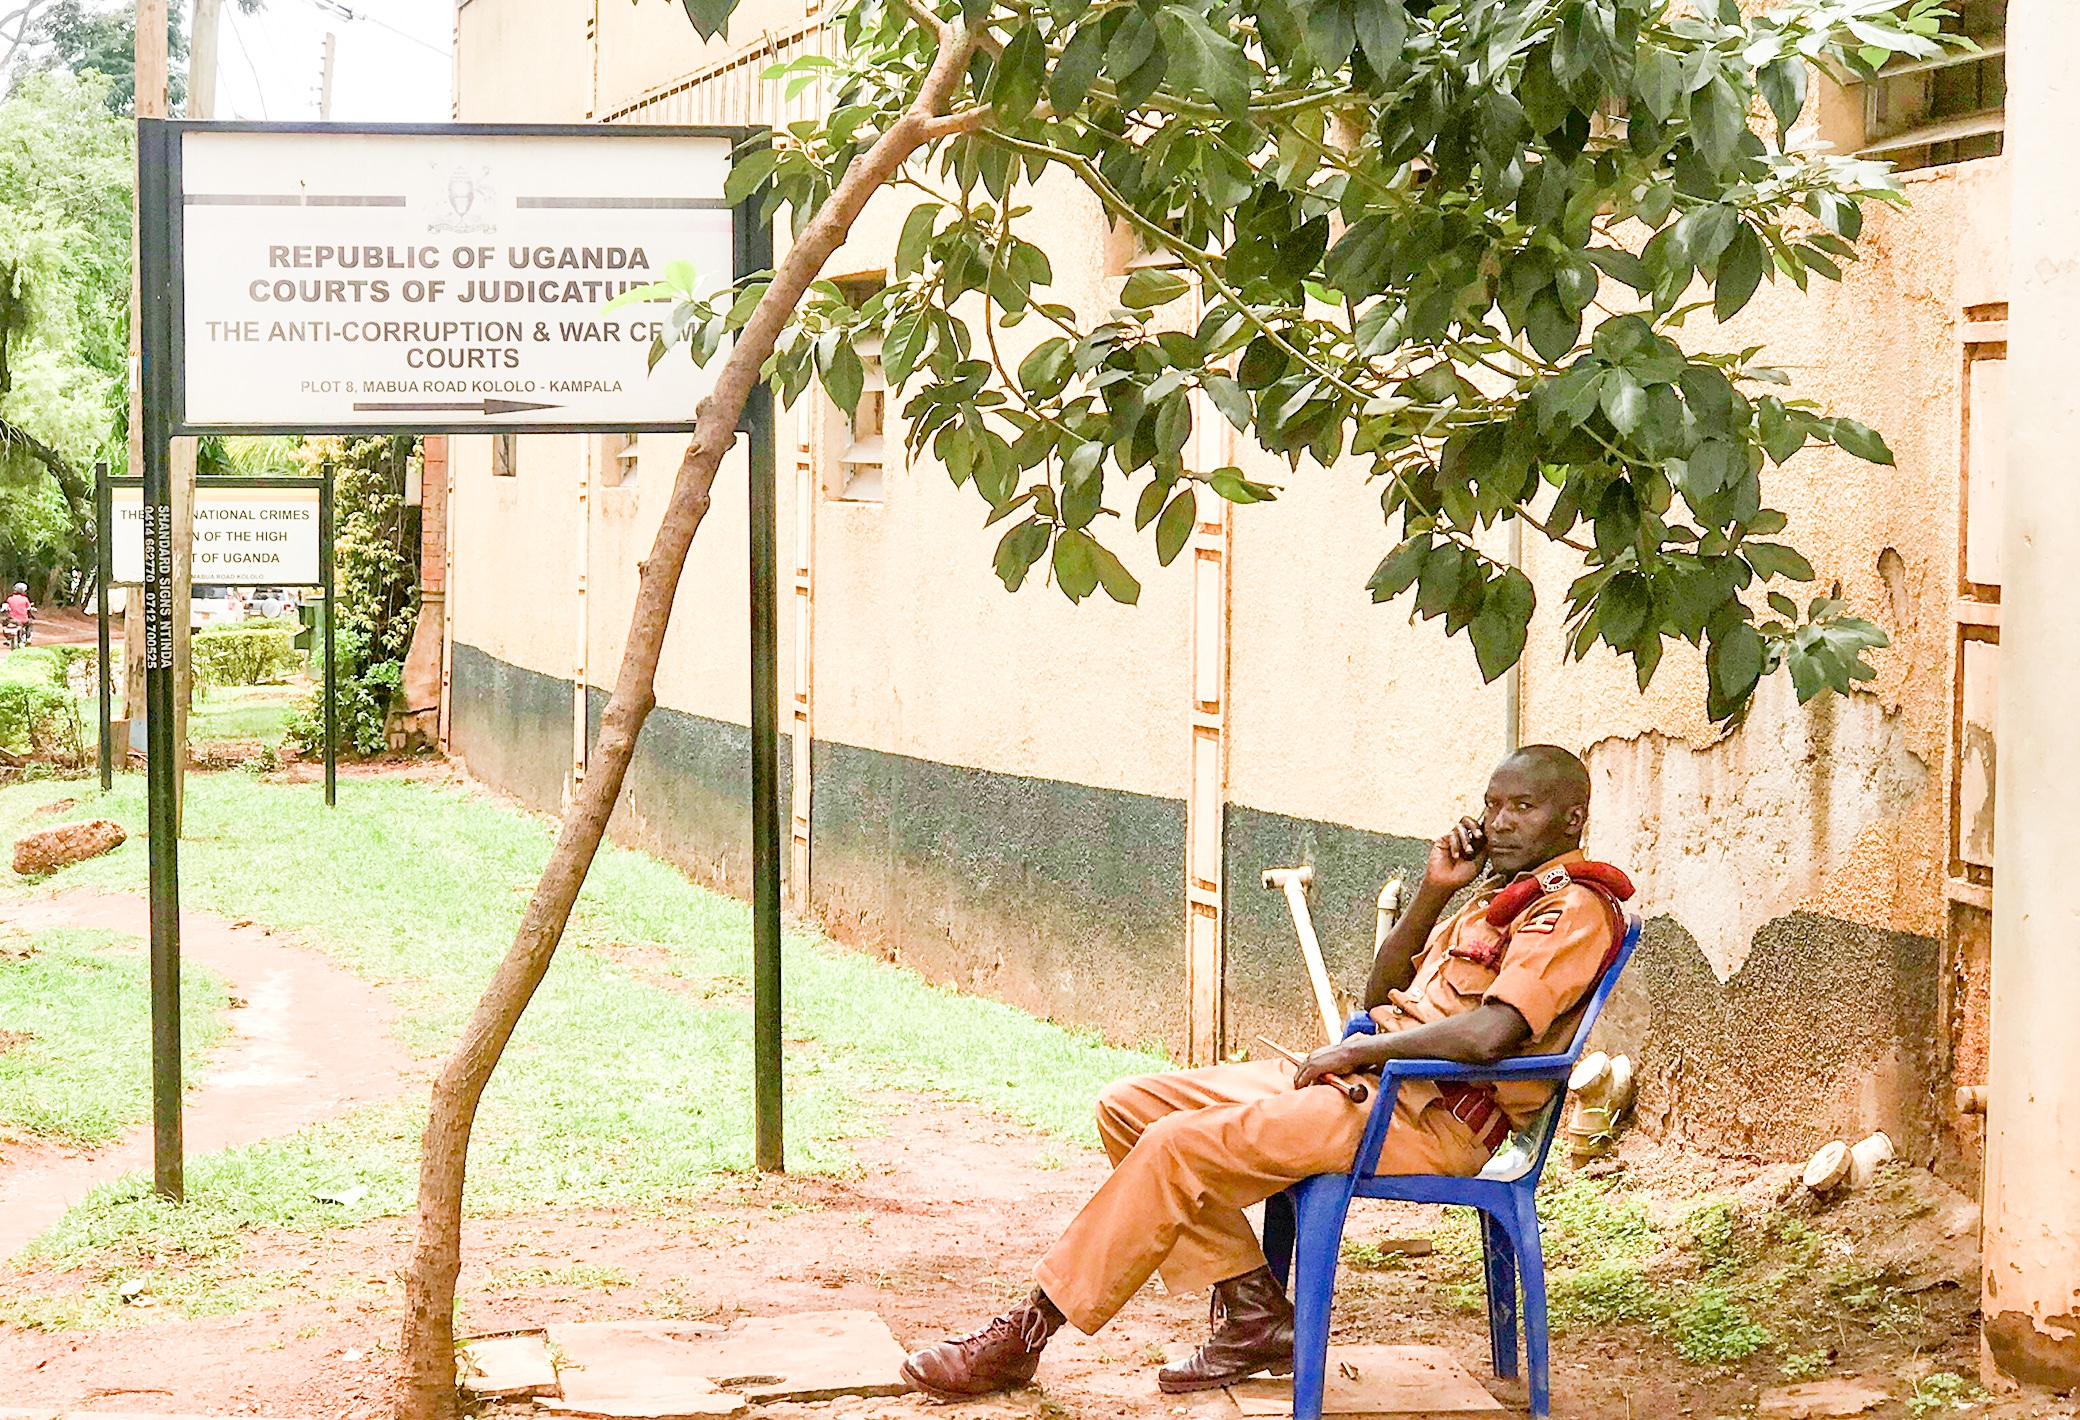 Uganda’s Anti-Corruption Court was established in 2008 as a special division of the High Court to adjudicate corruption and corruption related cases. Photo: Vibeke Quaade